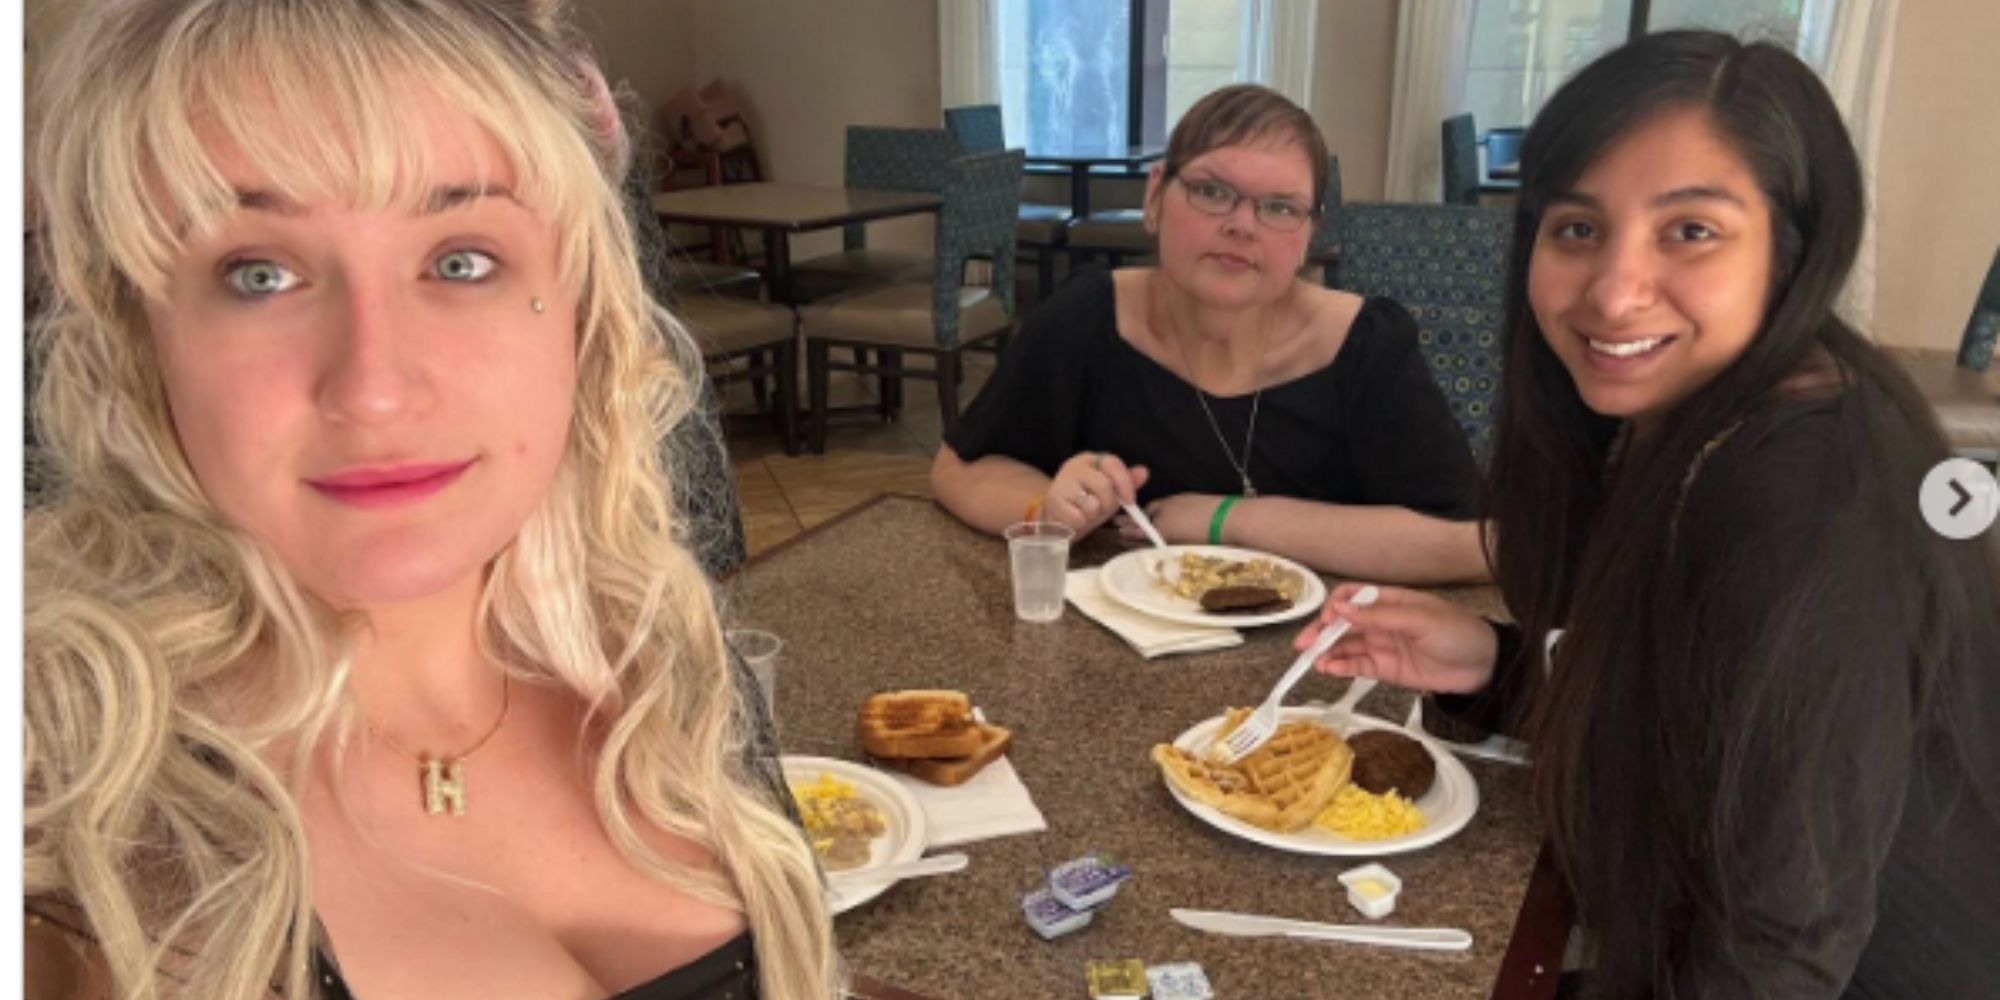 1000-lb Sisters Tammy Slaton, Haley Michelle & Paola at breakfast at a hotel cafeteria